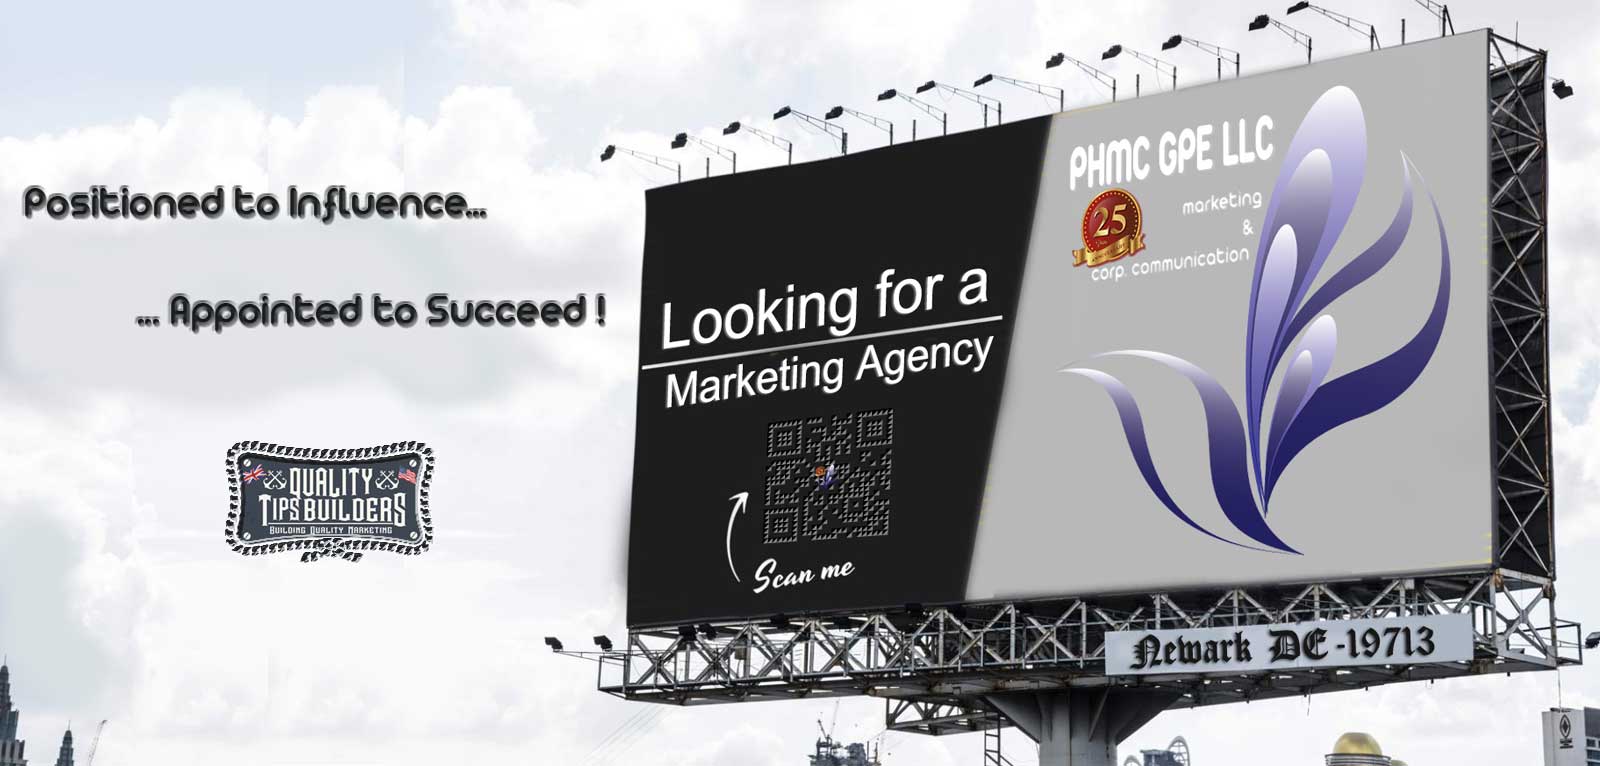 Agency_Site ✔ Offer & Solutions | ::: PHMC GPE LLC :::: Marketing & Corp. Communication Agency